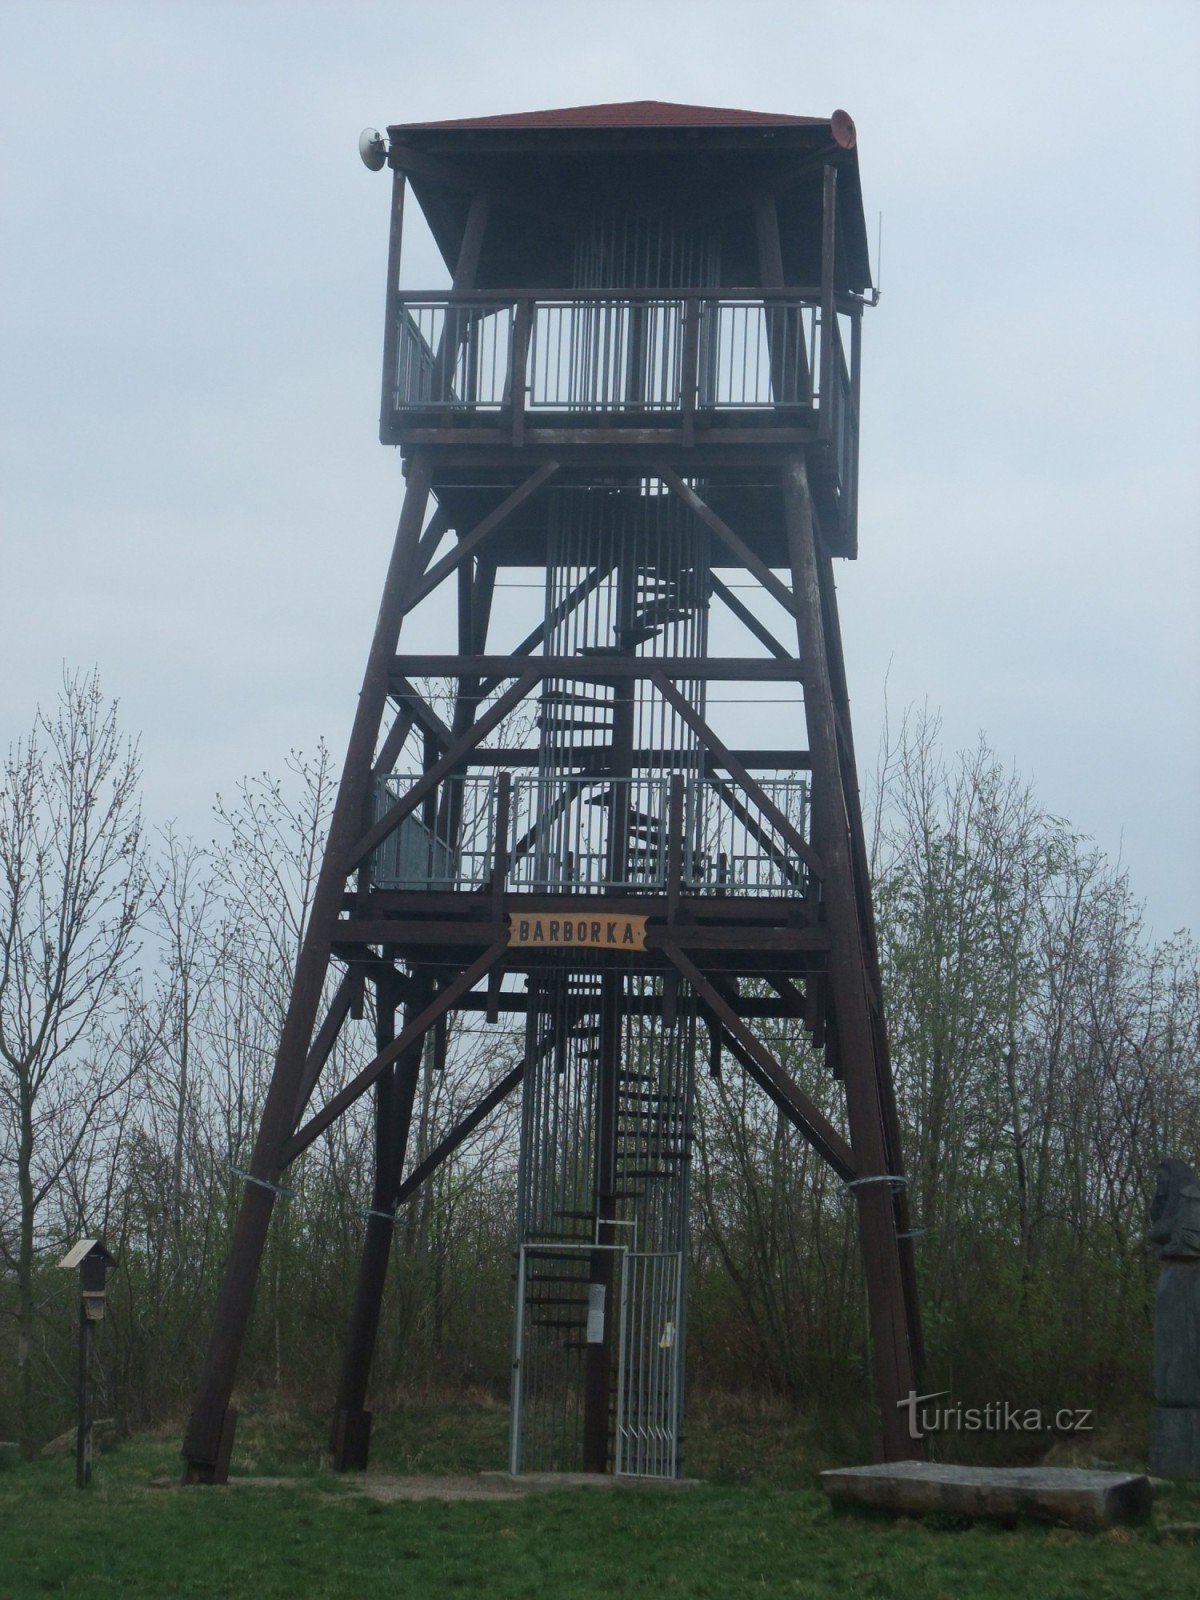 Barborka lookout tower